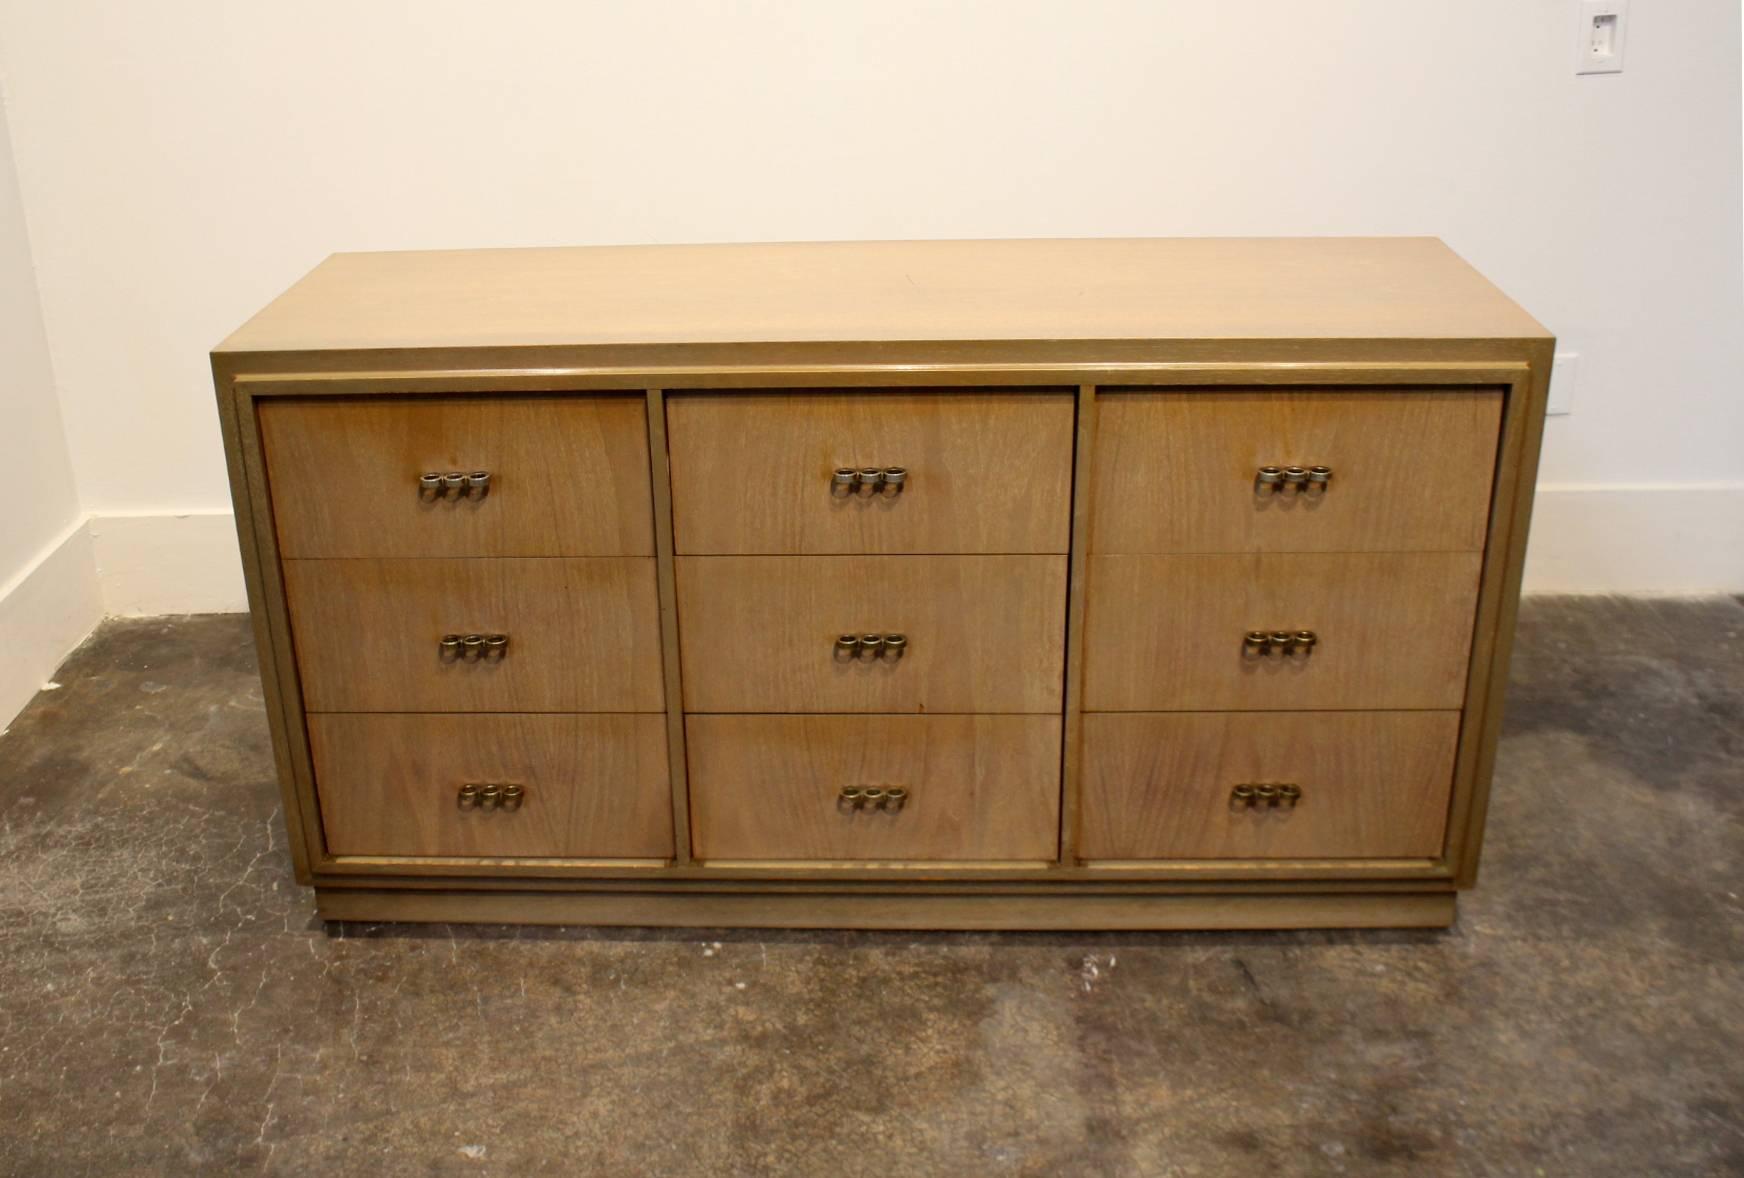 Striking sharp lines, beautiful walnut wood with olive green tones. Influences of Art Deco and Paul Frankl. Nine drawers total with brass-knuckle shaped pulls.

Matching nightstands available.